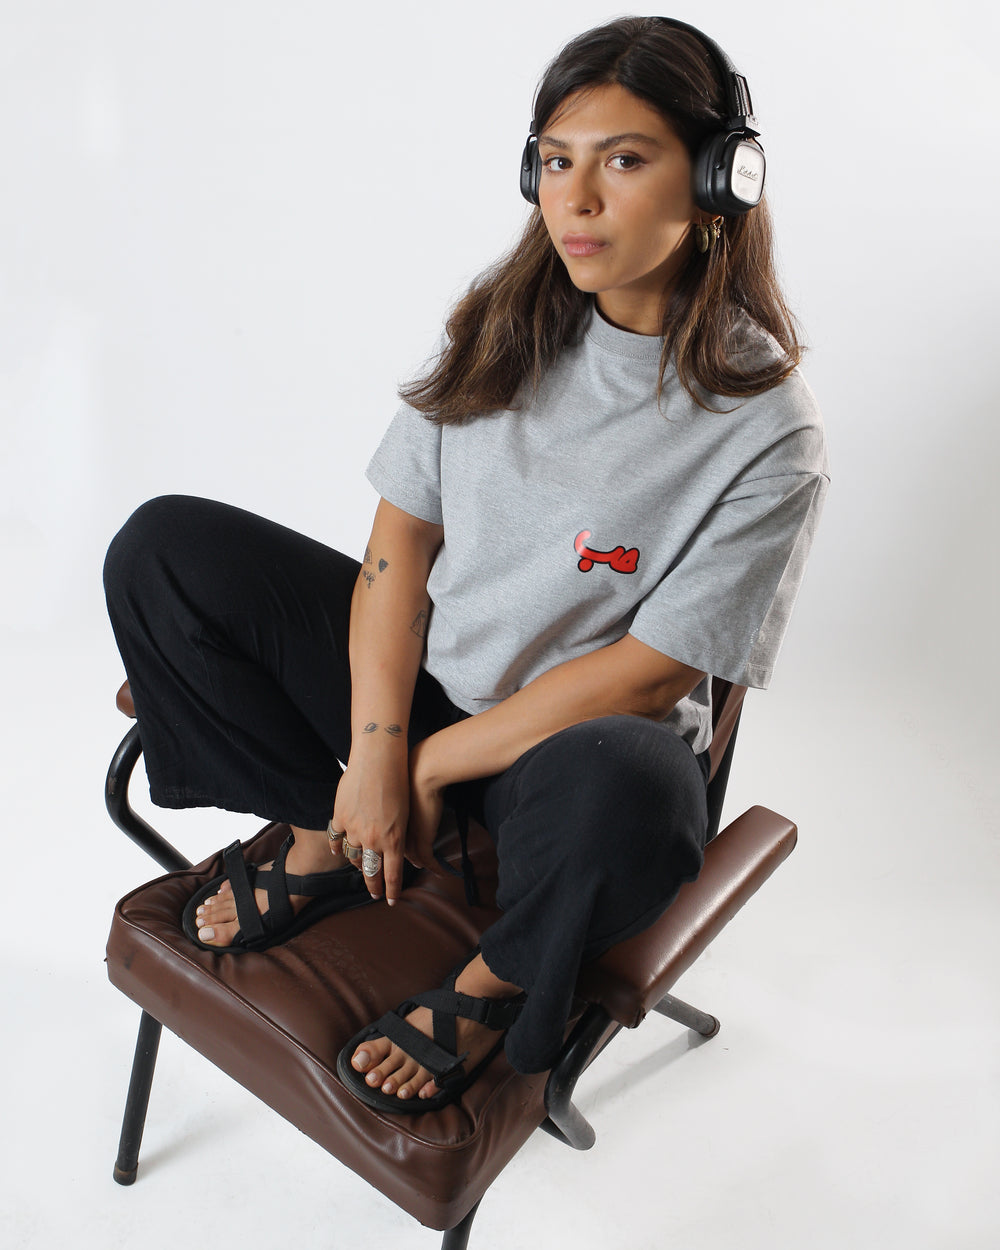 Young adult female wearing an Oversized grey T-shirt with Hobb written in Arabic حب and printed in red silkscreen on the side of the shirt along with black pants, black sandals and black headphone. Sitting on a brown leather chair.